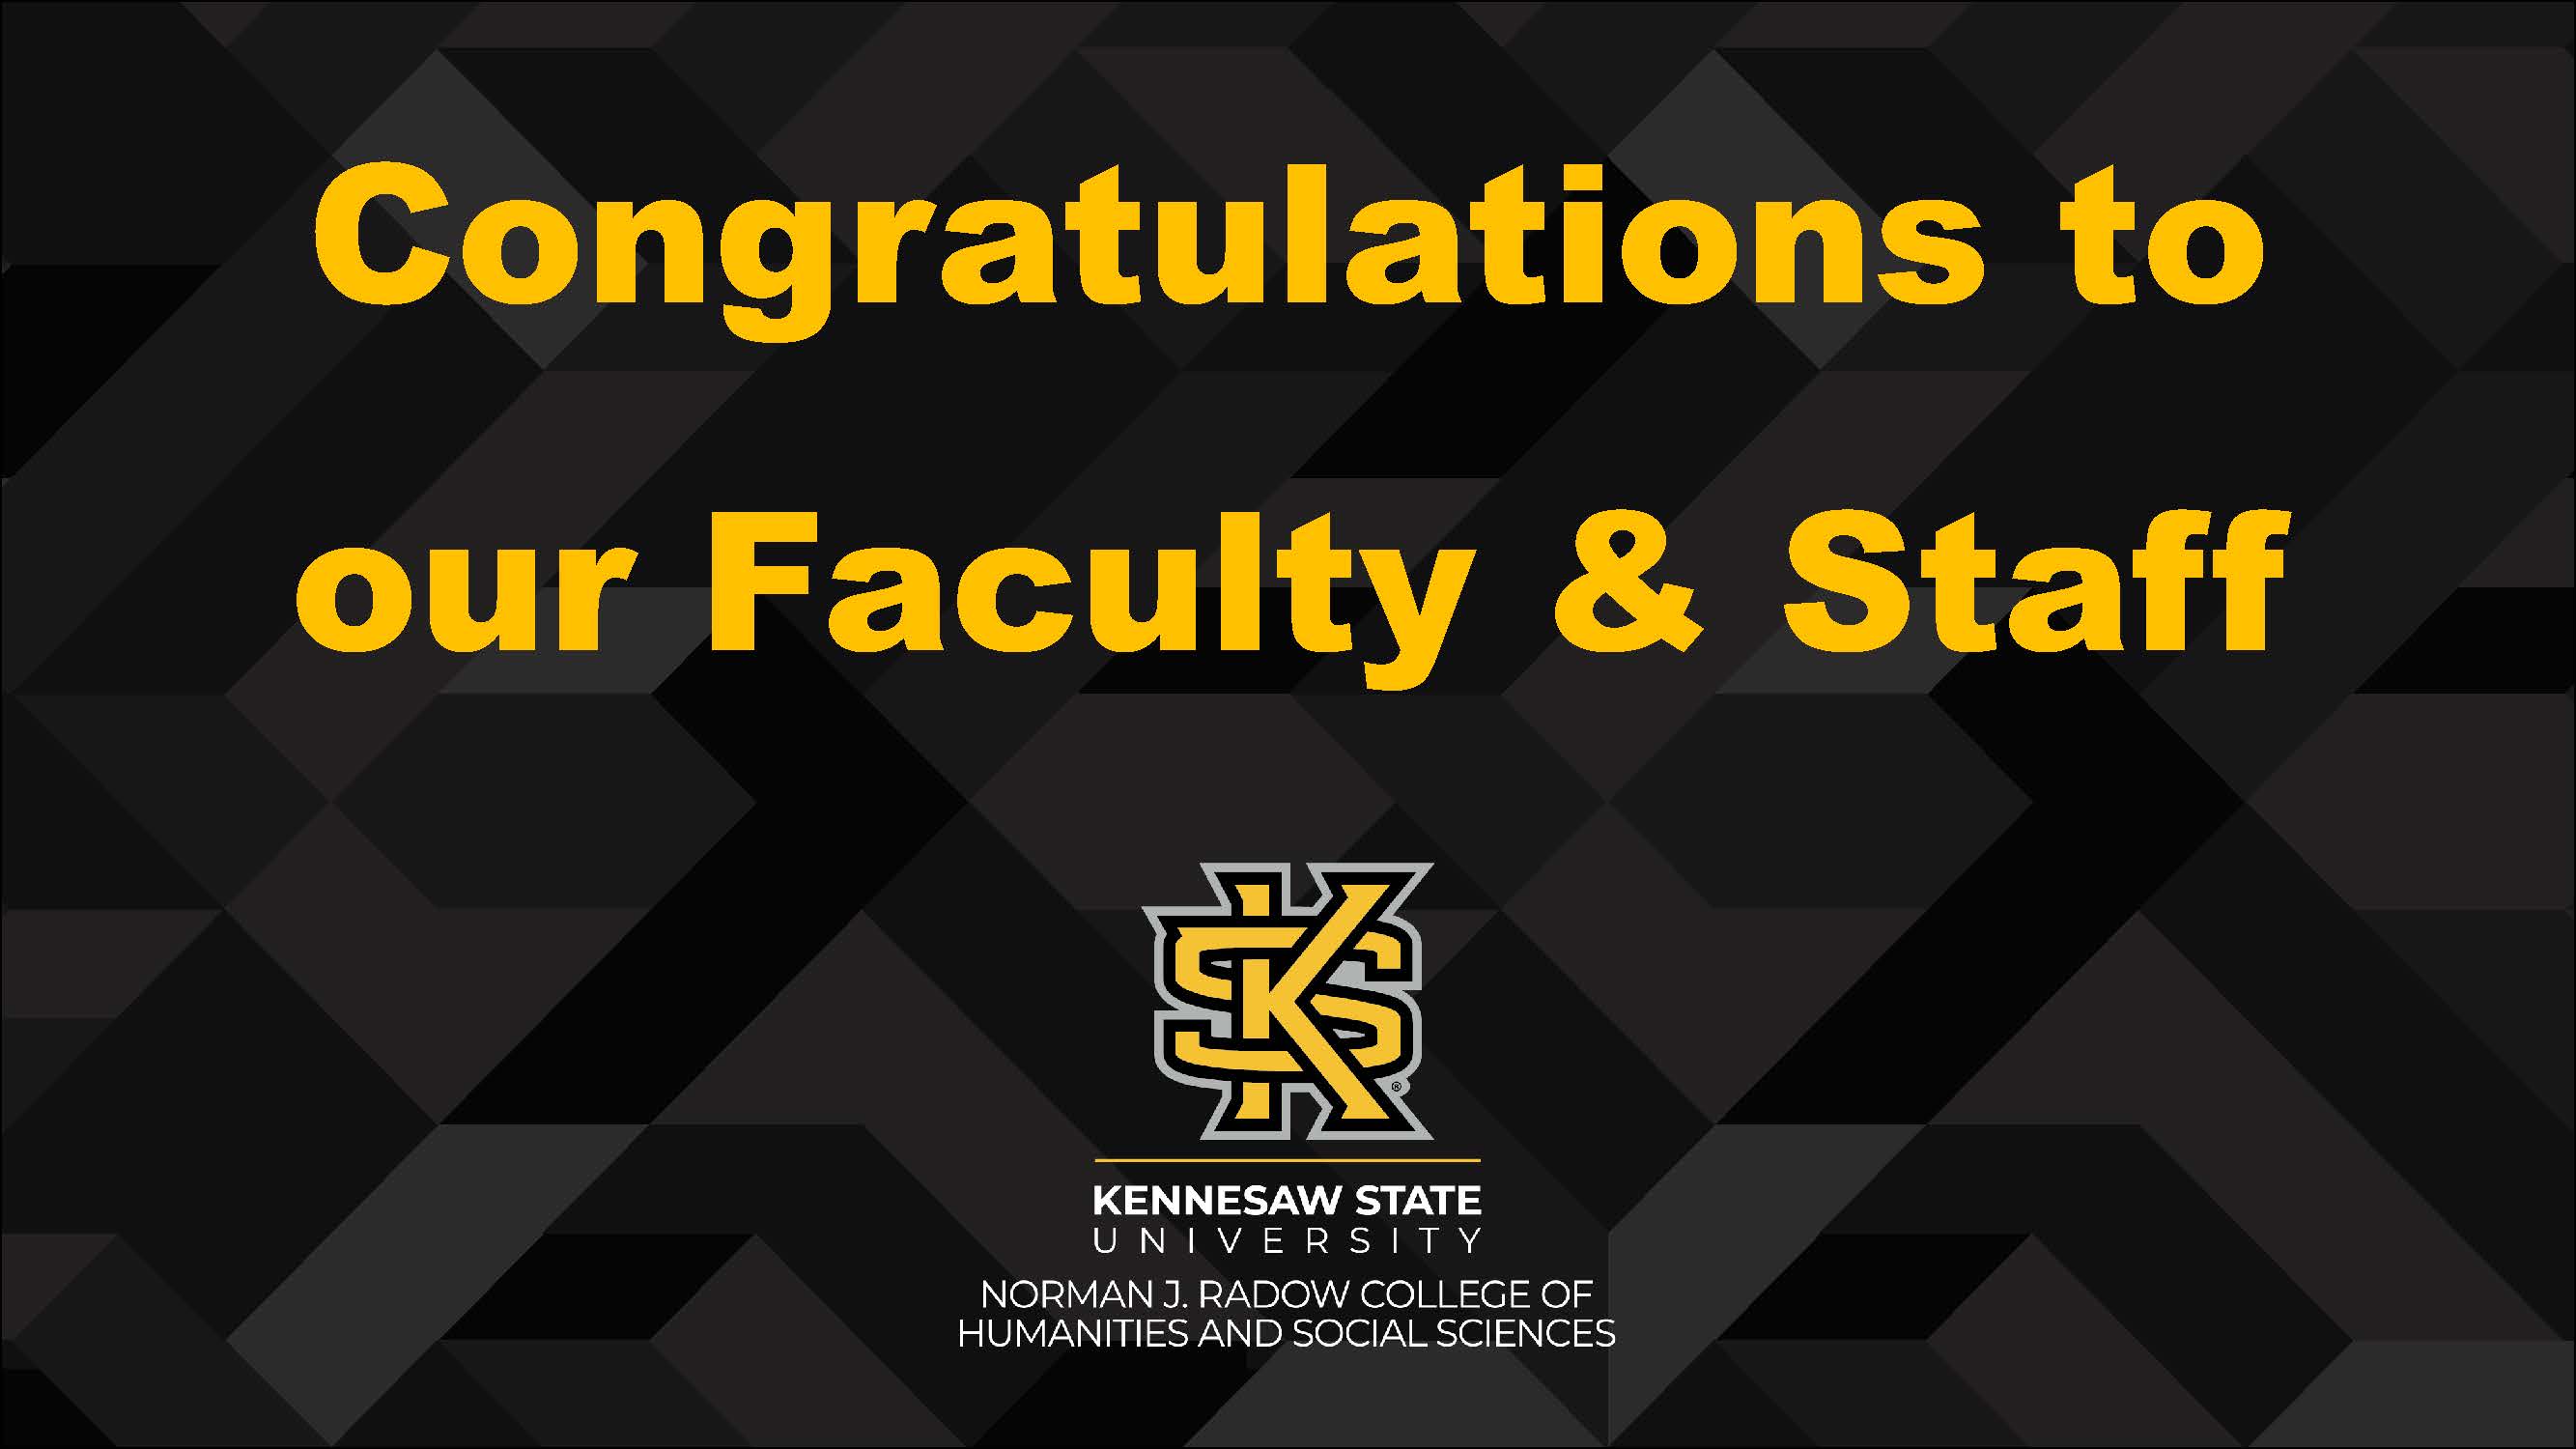 Congratulations to Faculty and Staff